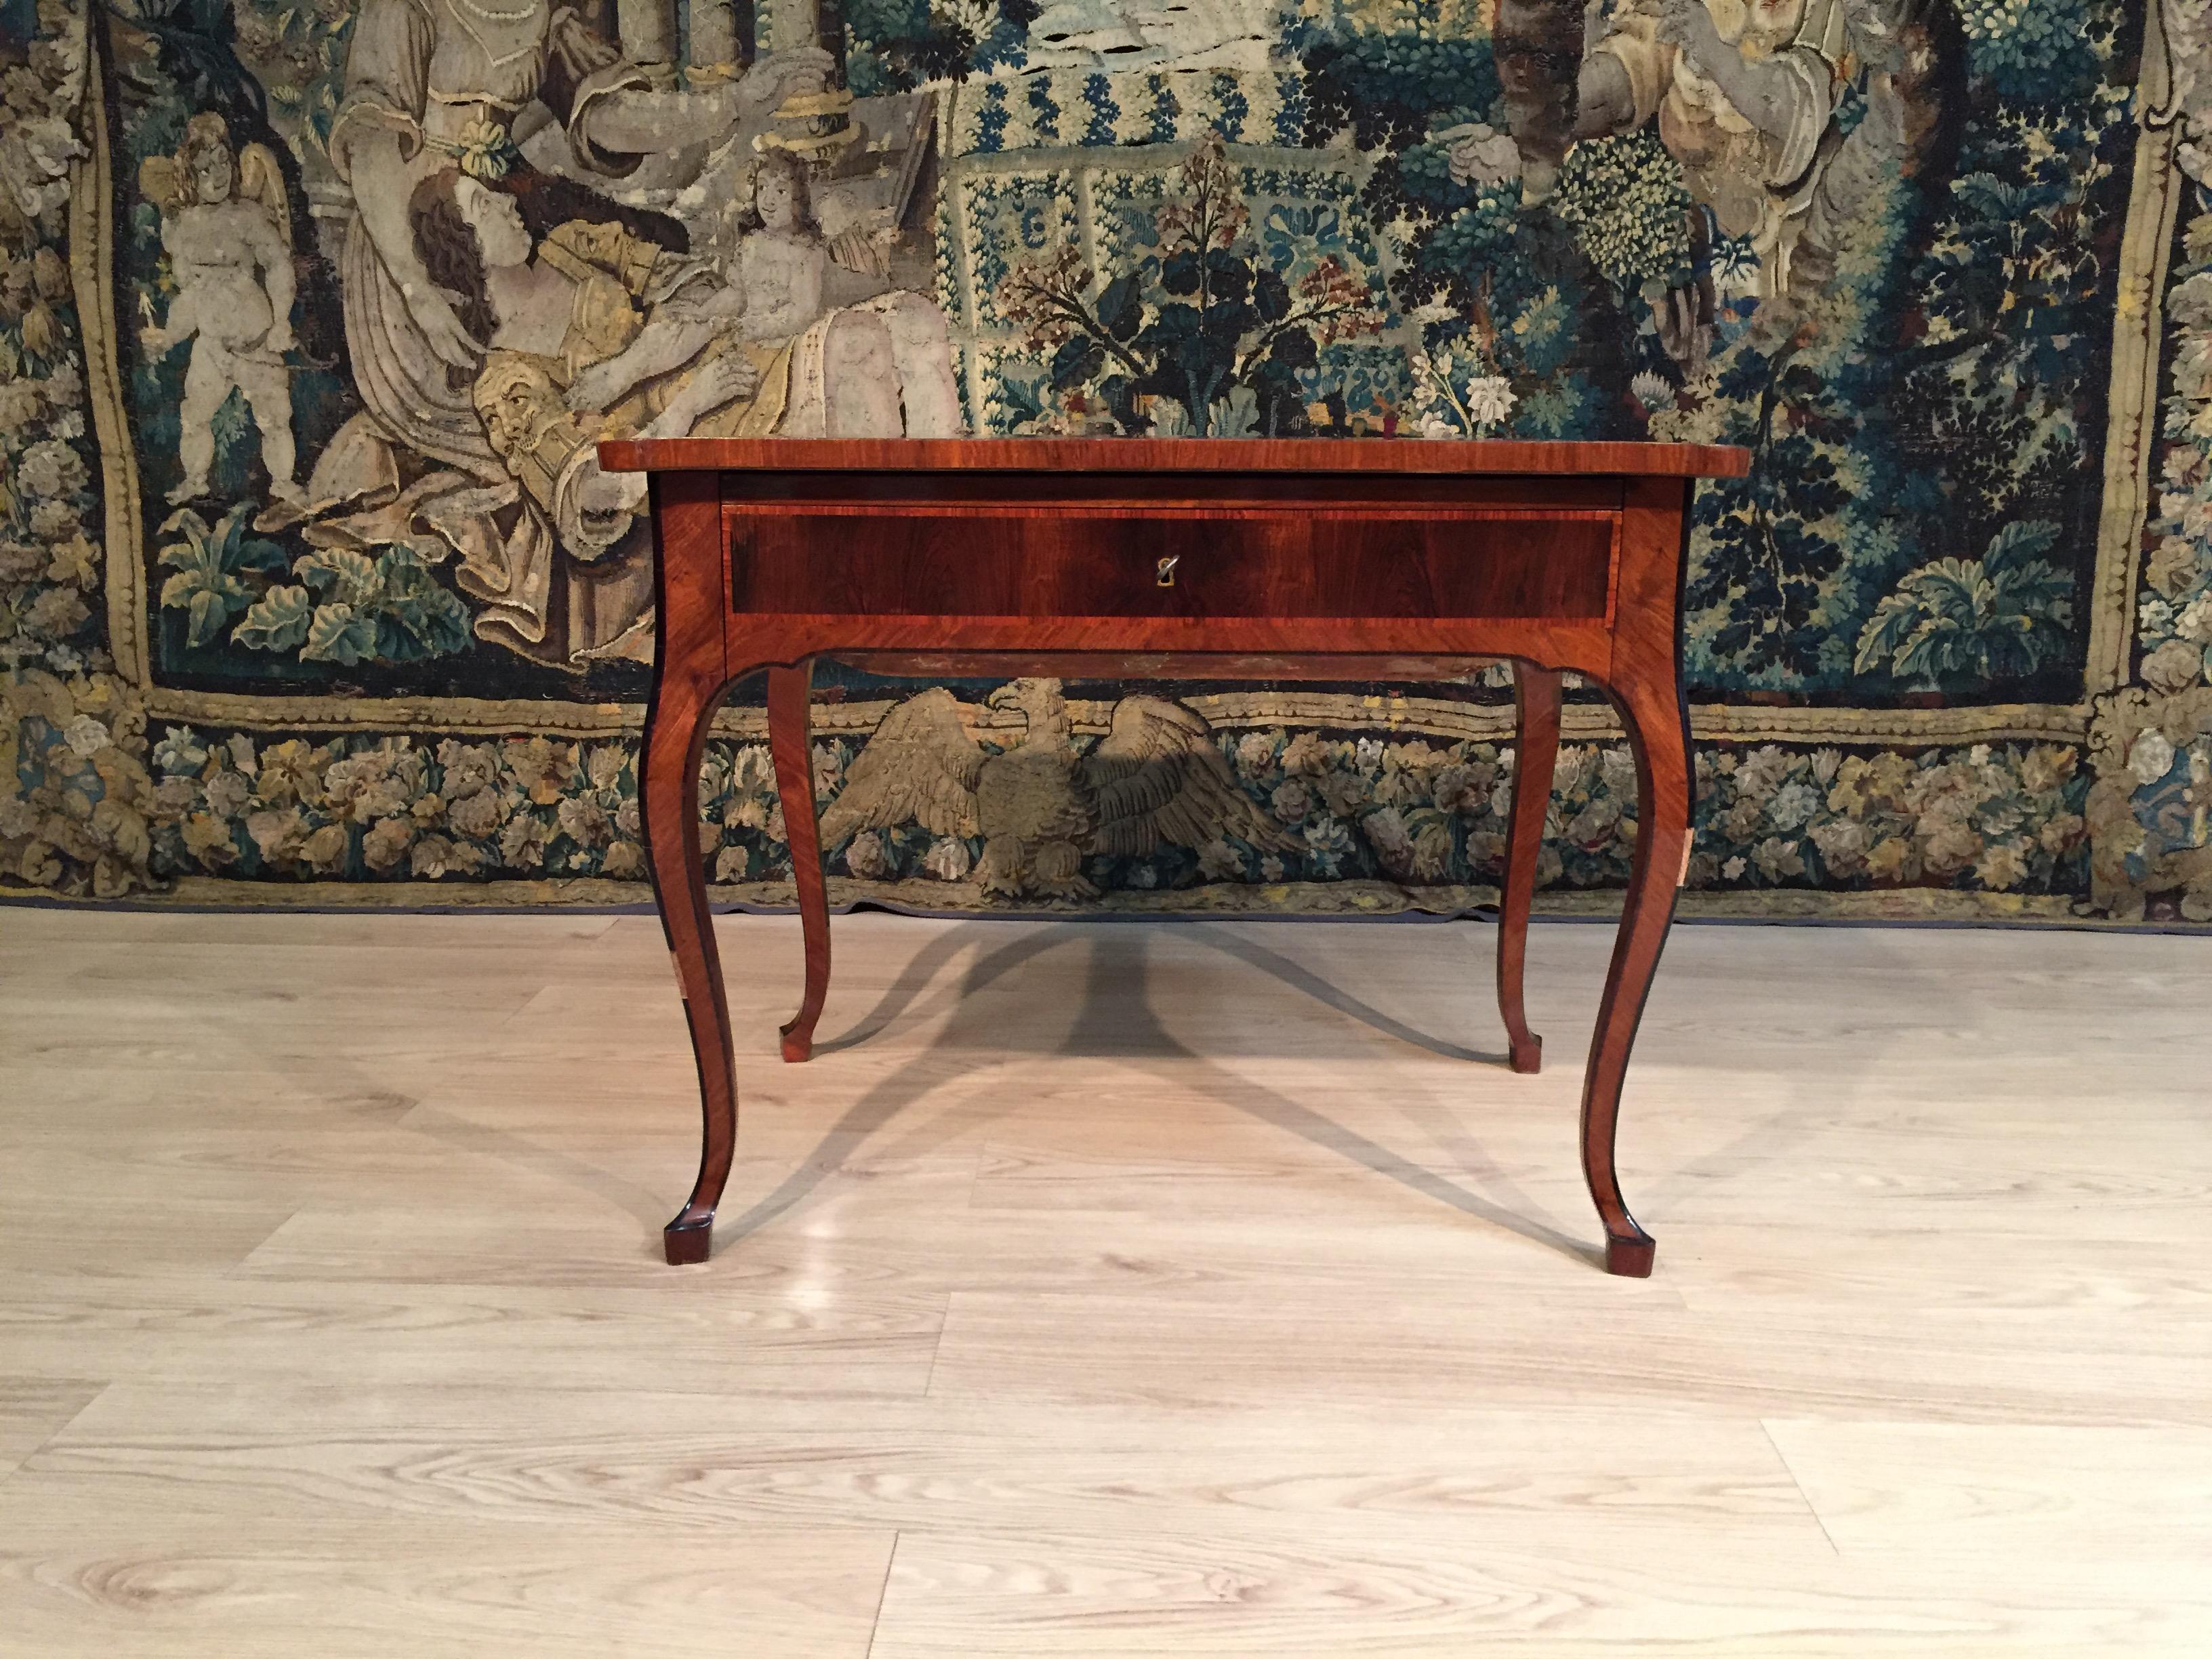 18th century, Italian Louis XV wood center desk

This elegant Louis XV desk, made in Tuscany, Italy, in the 18th century, is paved with several precious wooden essences, such as rosewood, bois de rose, walnut and, for the interiors, olive wood.